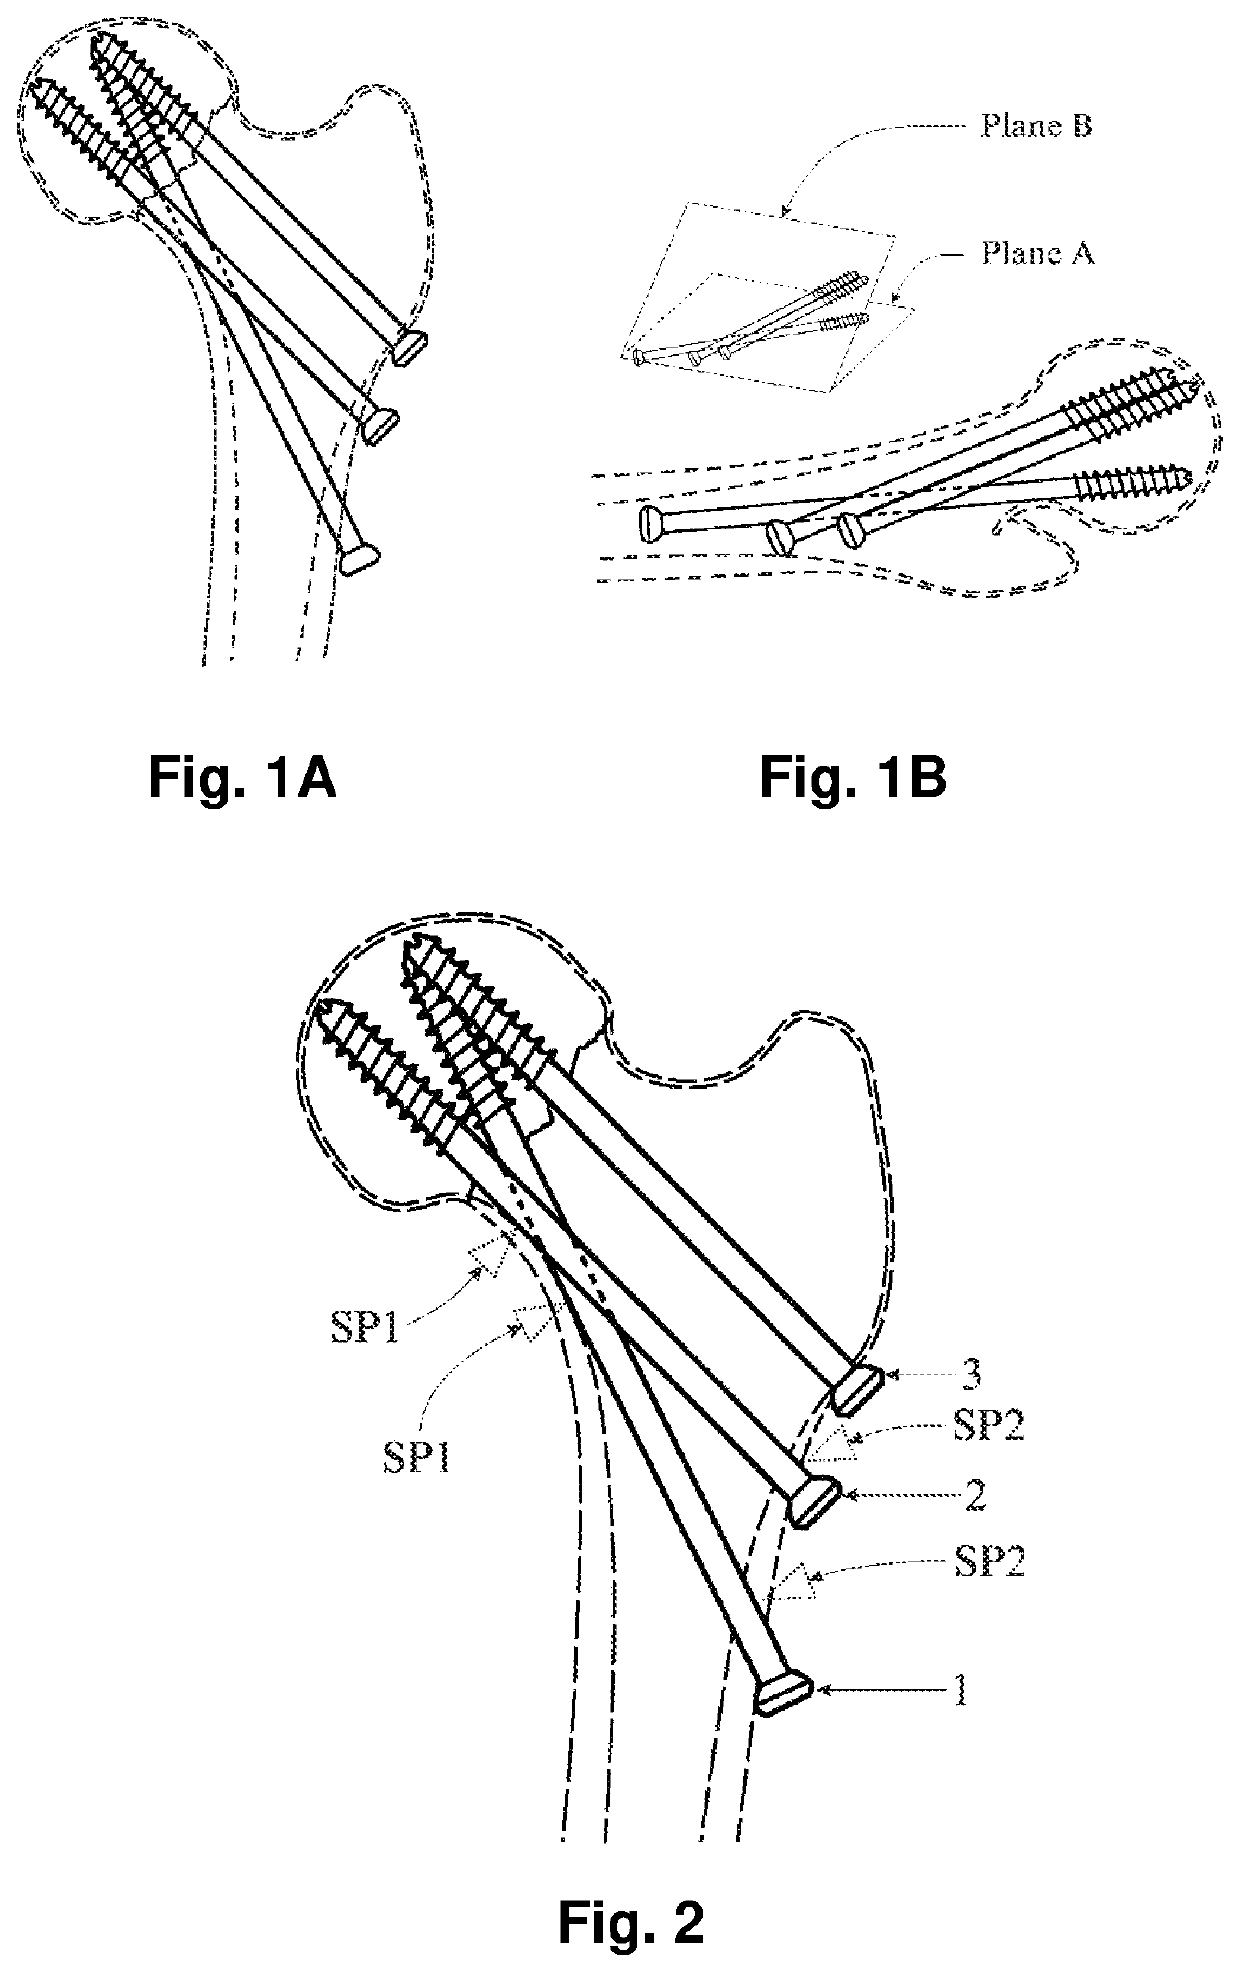 Surgical method for biplane screw fixation of femoral neck fractures (calcar buttressed screw fixation)